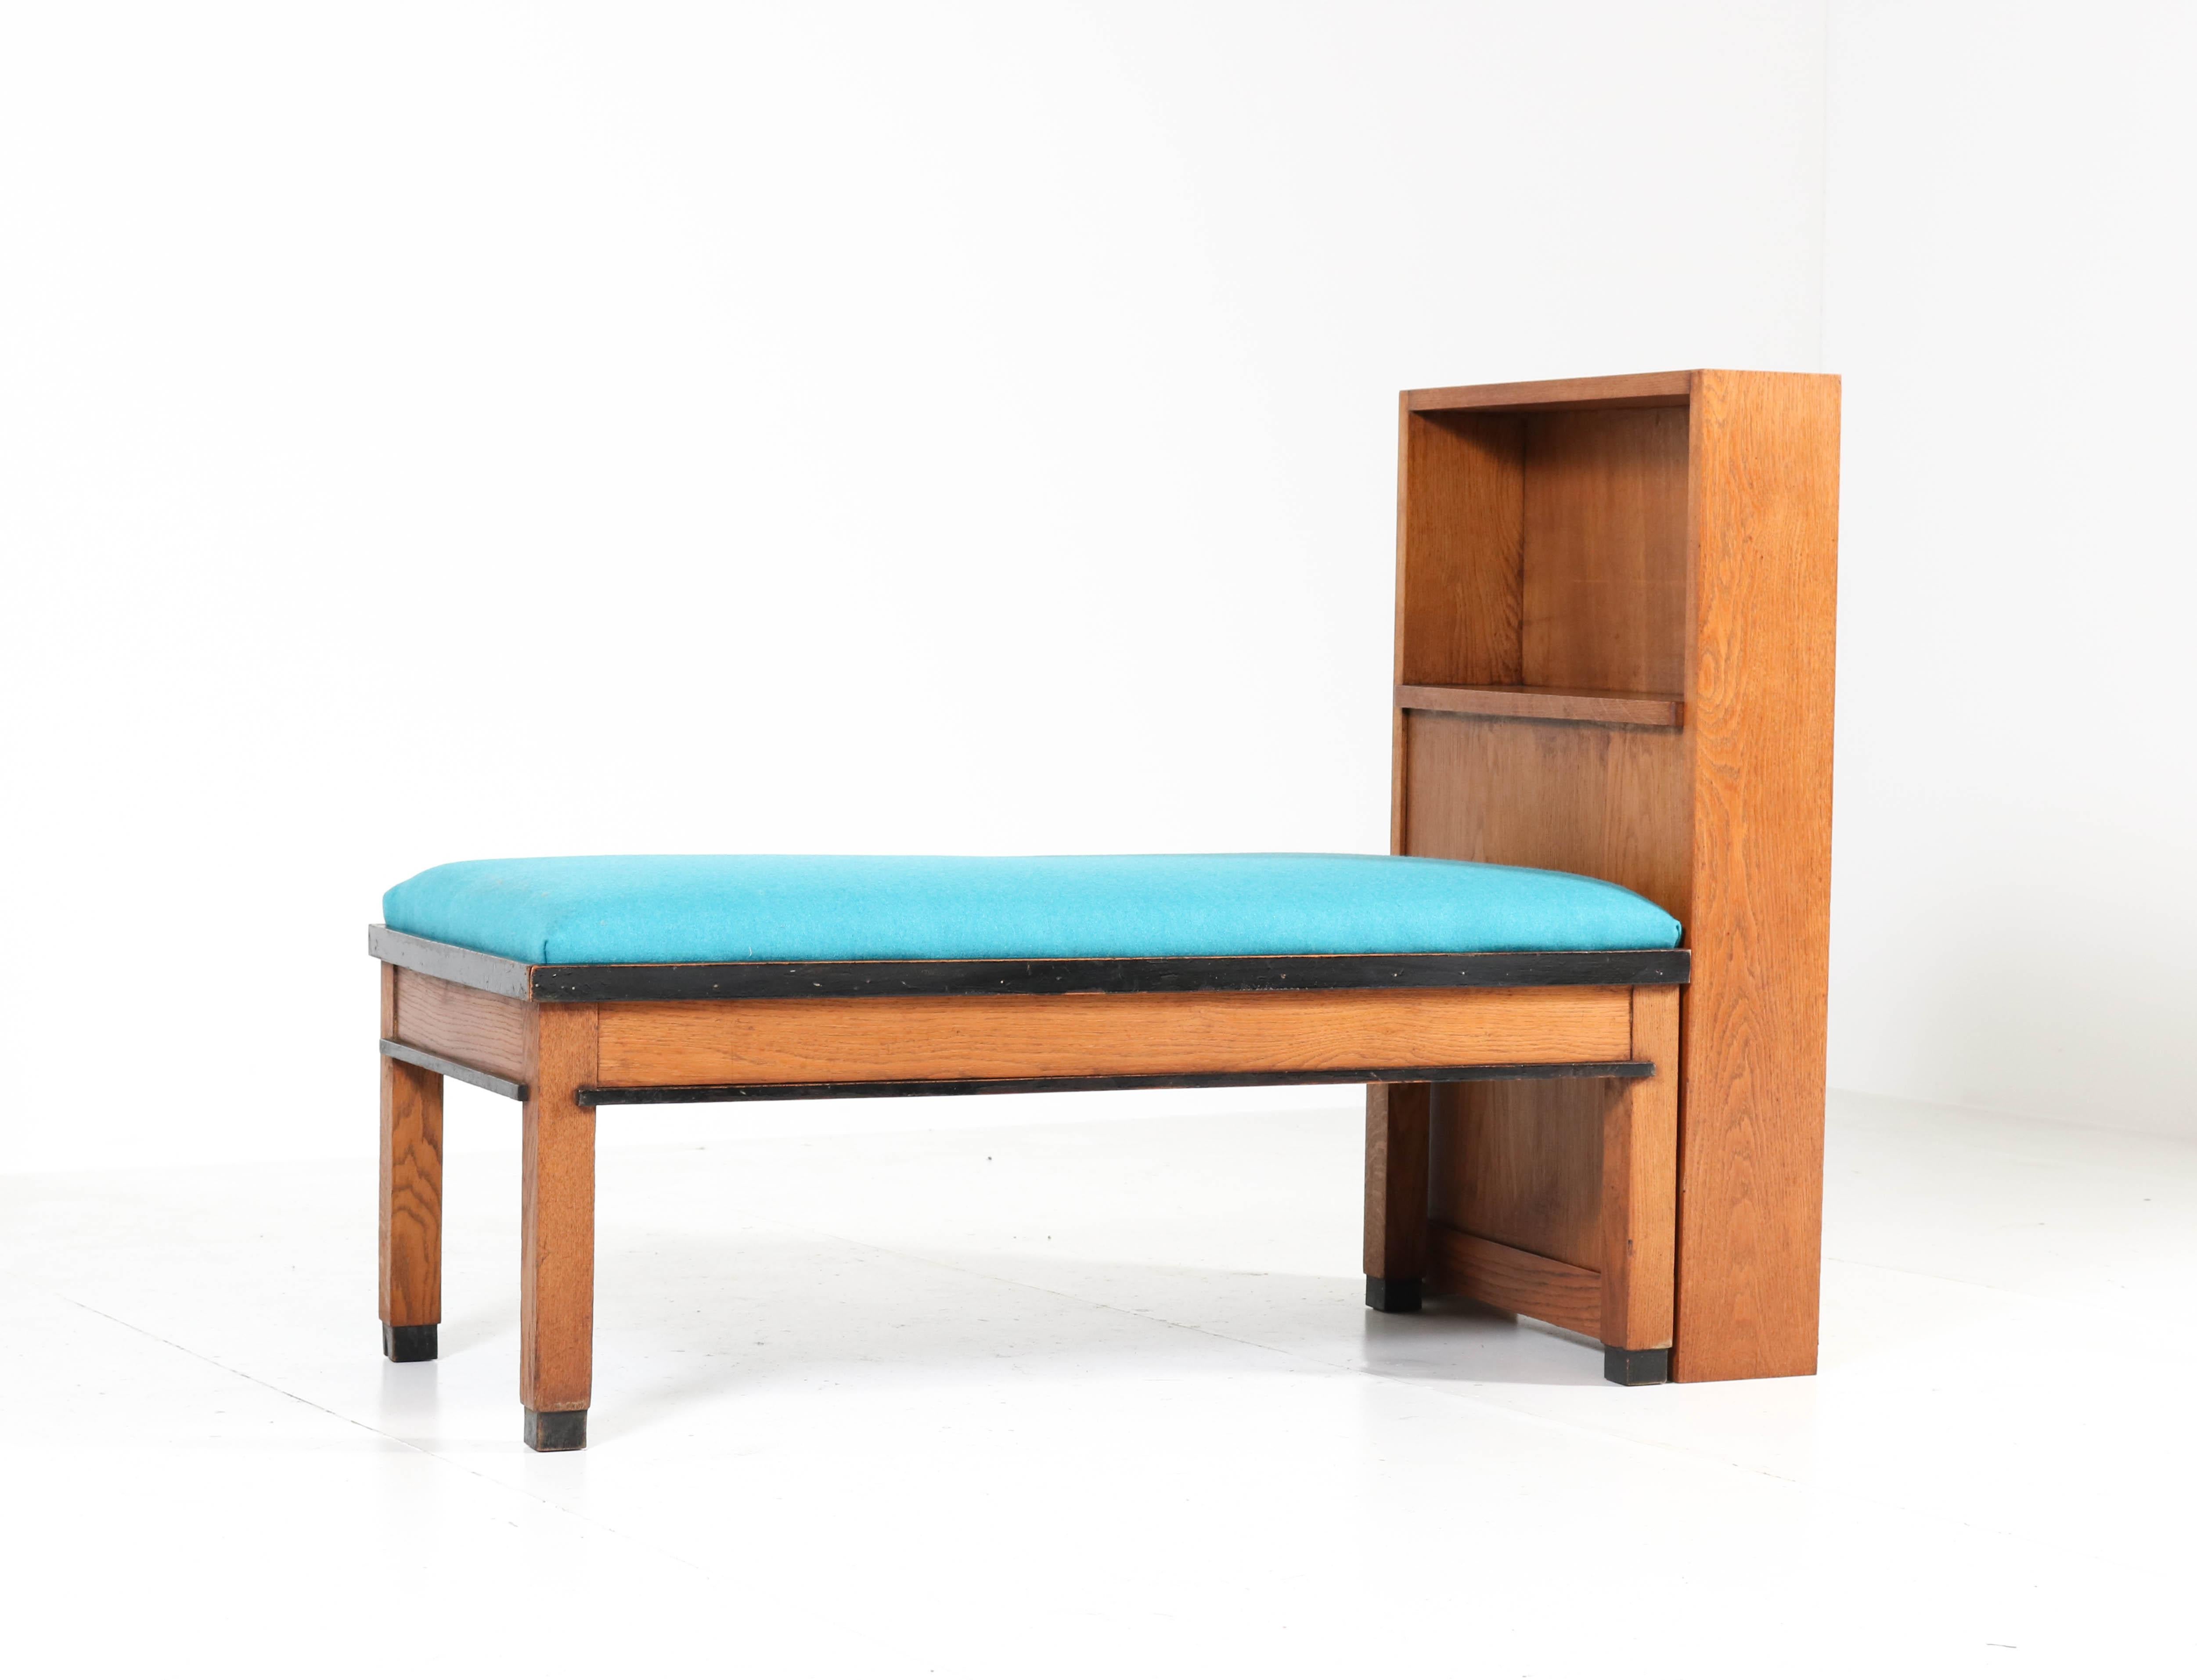 Wonderful and rare Art Deco Haagse School sofa with bookcase.
Design by Jan Brunott.
Striking Dutch design from the 1920s.
Solid oak and oak veneer and re-upholstered with Italian fabric.
The bookcase can be attached to the sofa in two positions